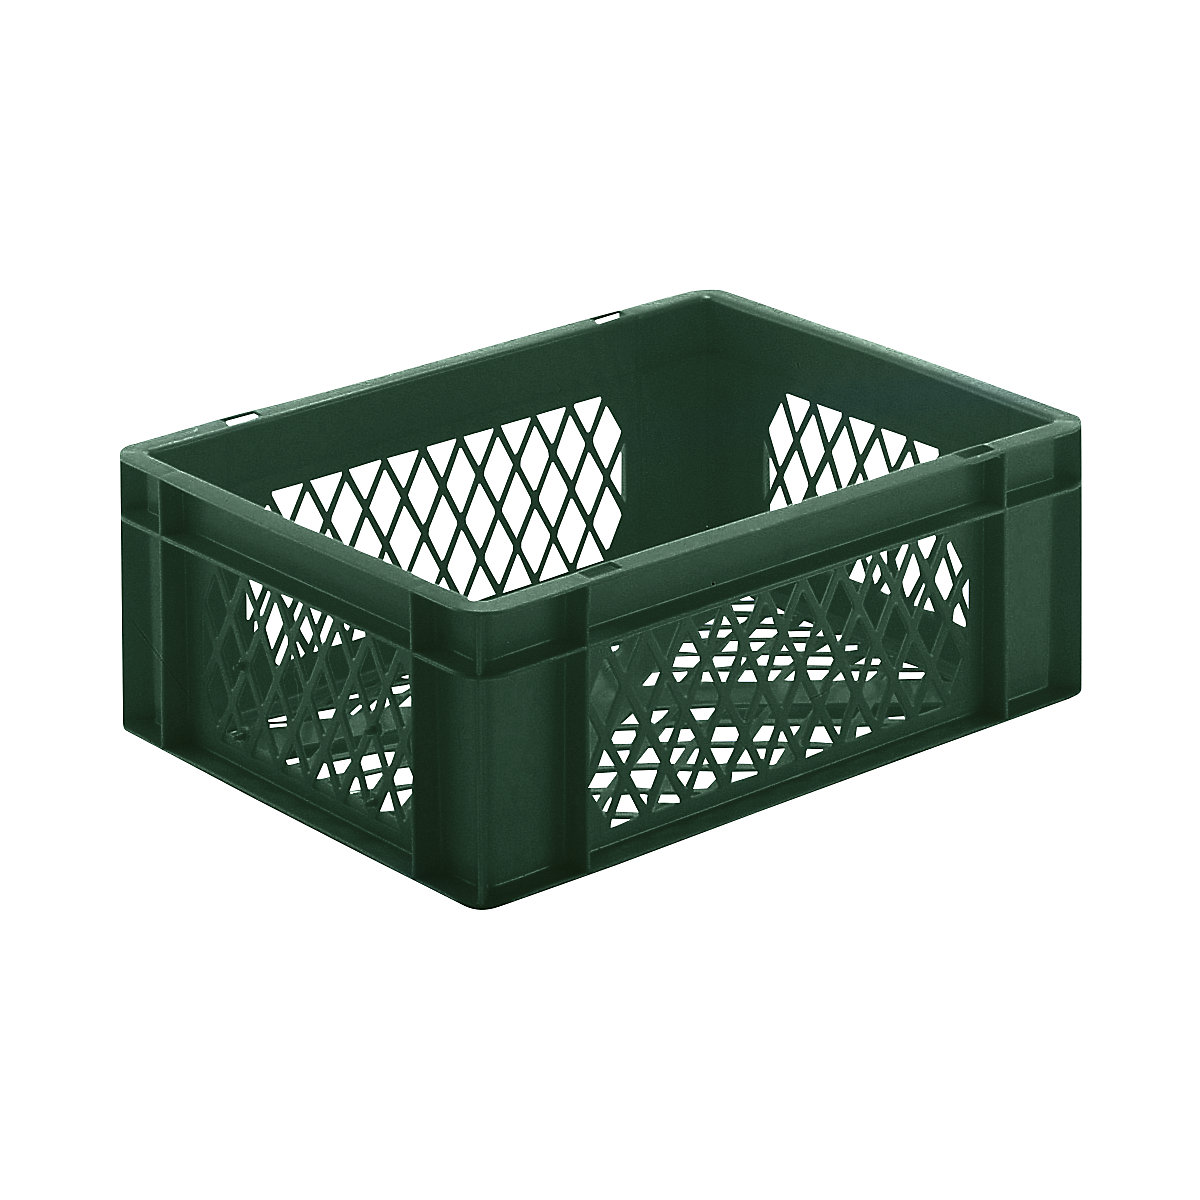 Euro stacking container, perforated walls and base, LxWxH 400 x 300 x 145 mm, green, pack of 5-8